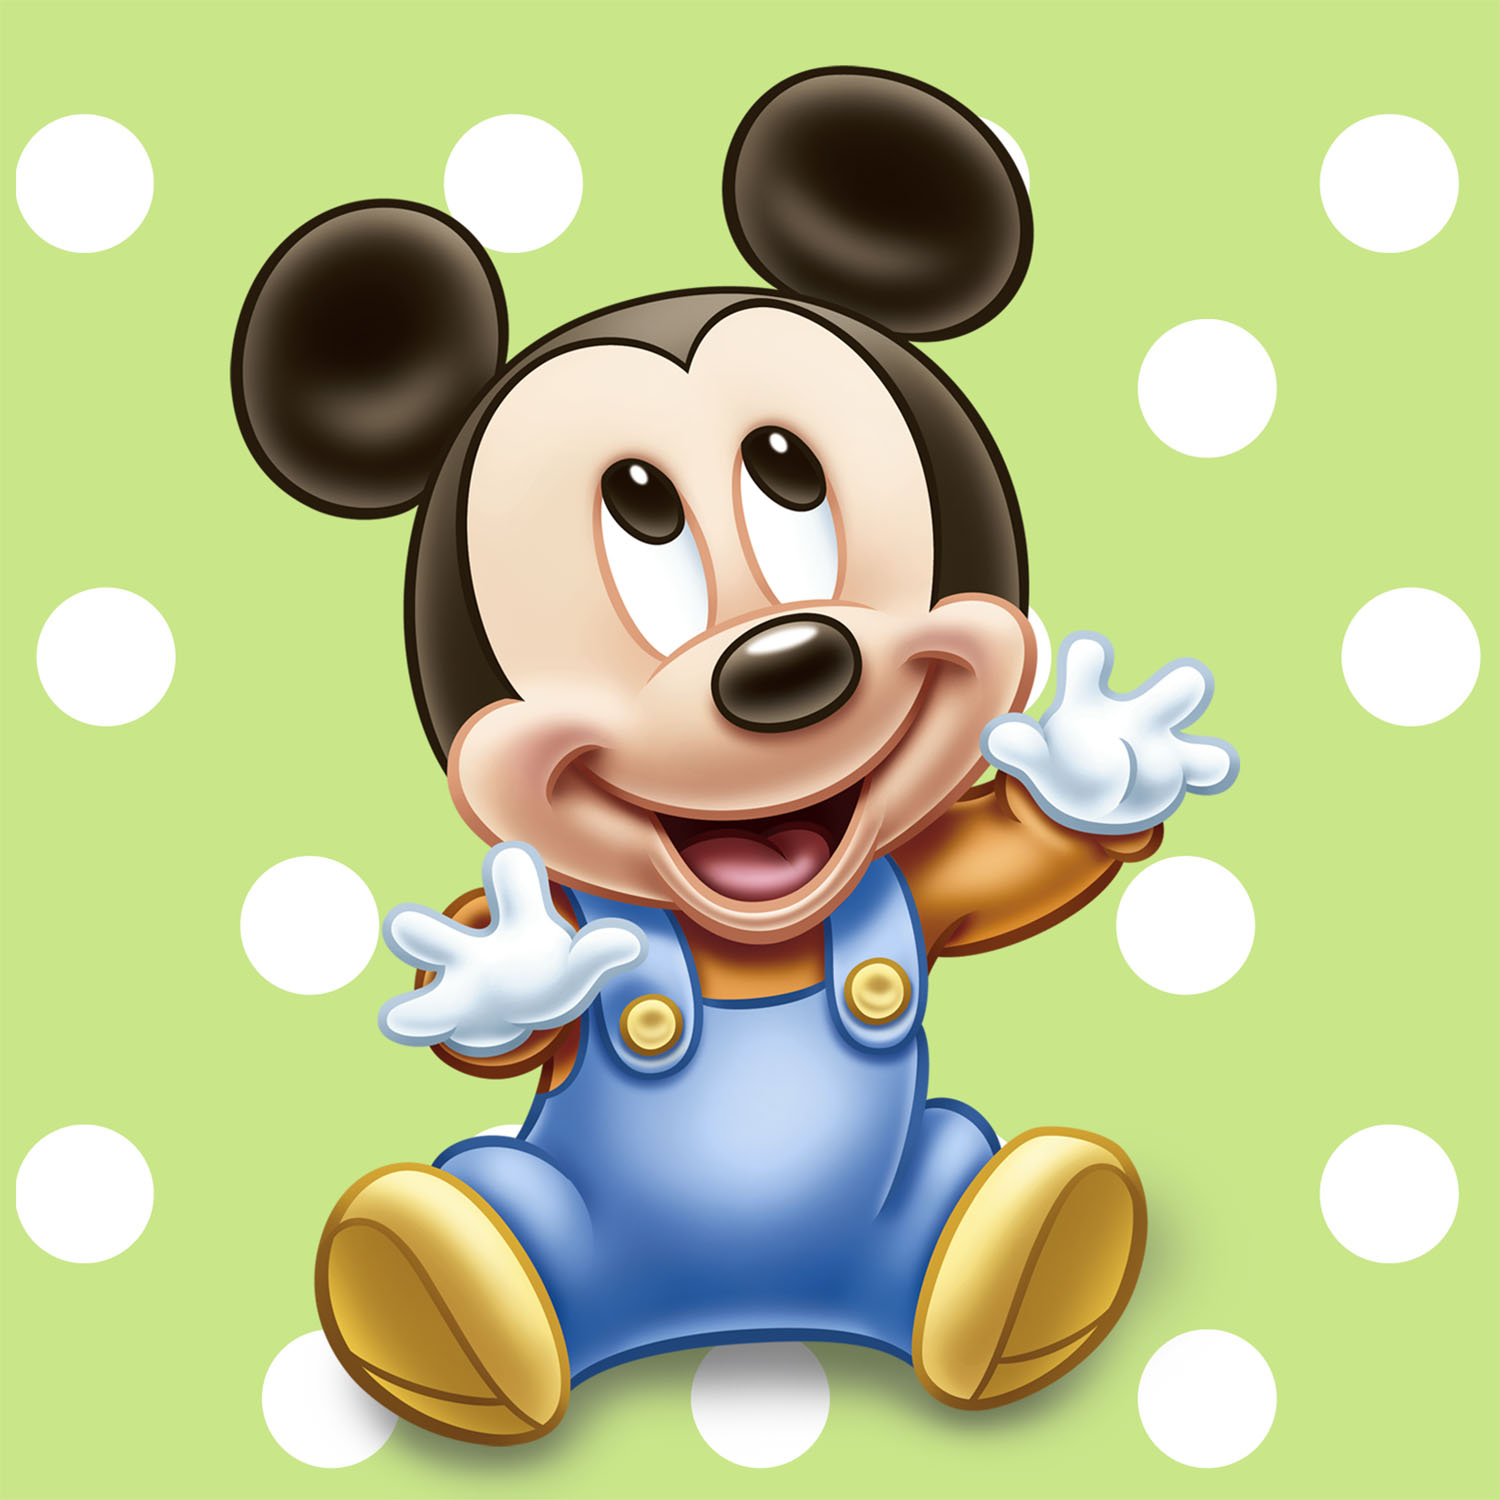 Baby minnie mouse wallpaper